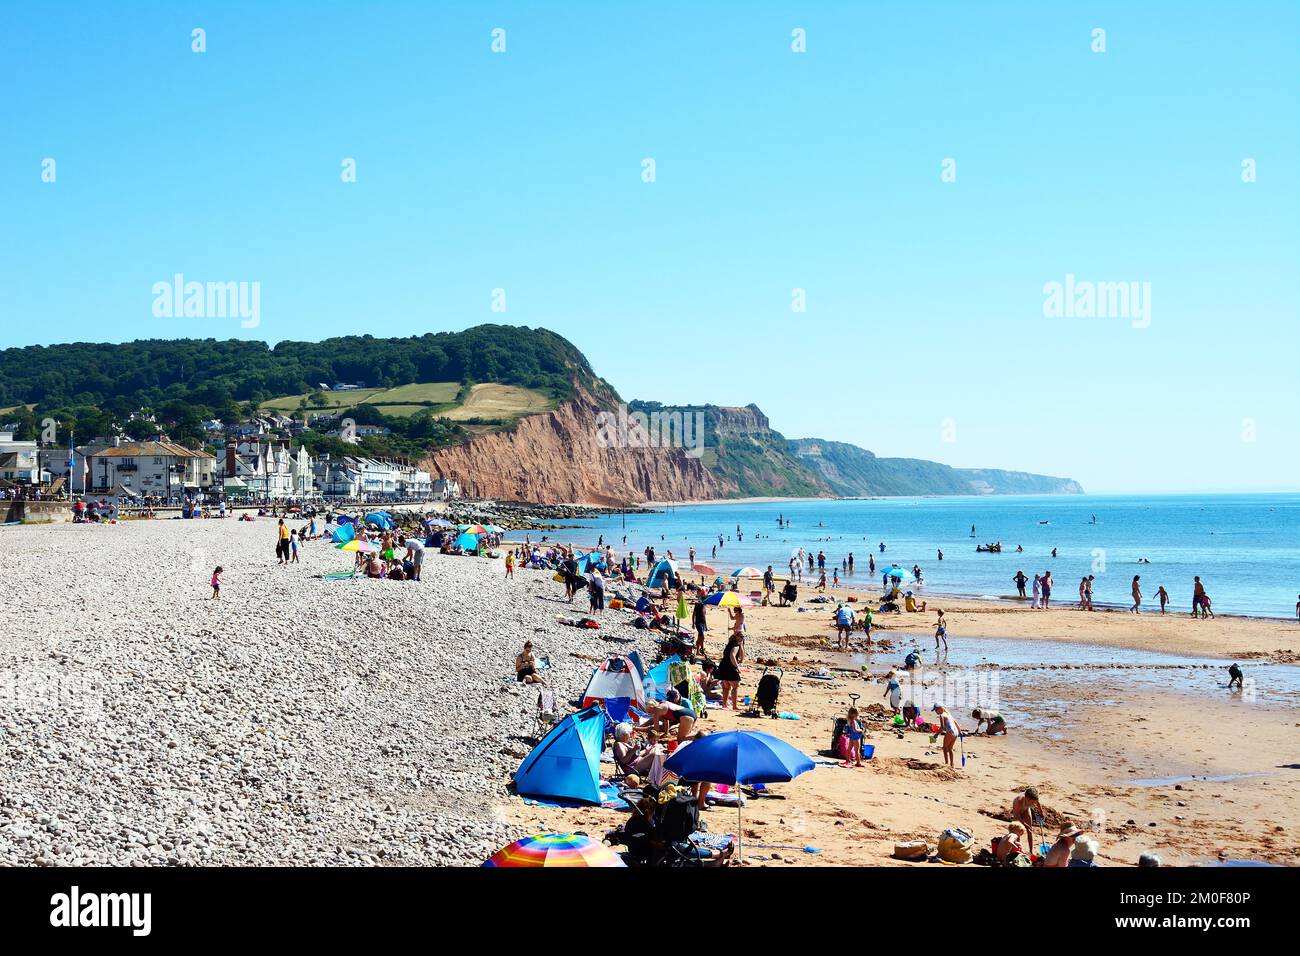 Tourists relaxing on the beach with views towards the town and cliffs, Sidmouth, Devon, UK, Europe. Stock Photo